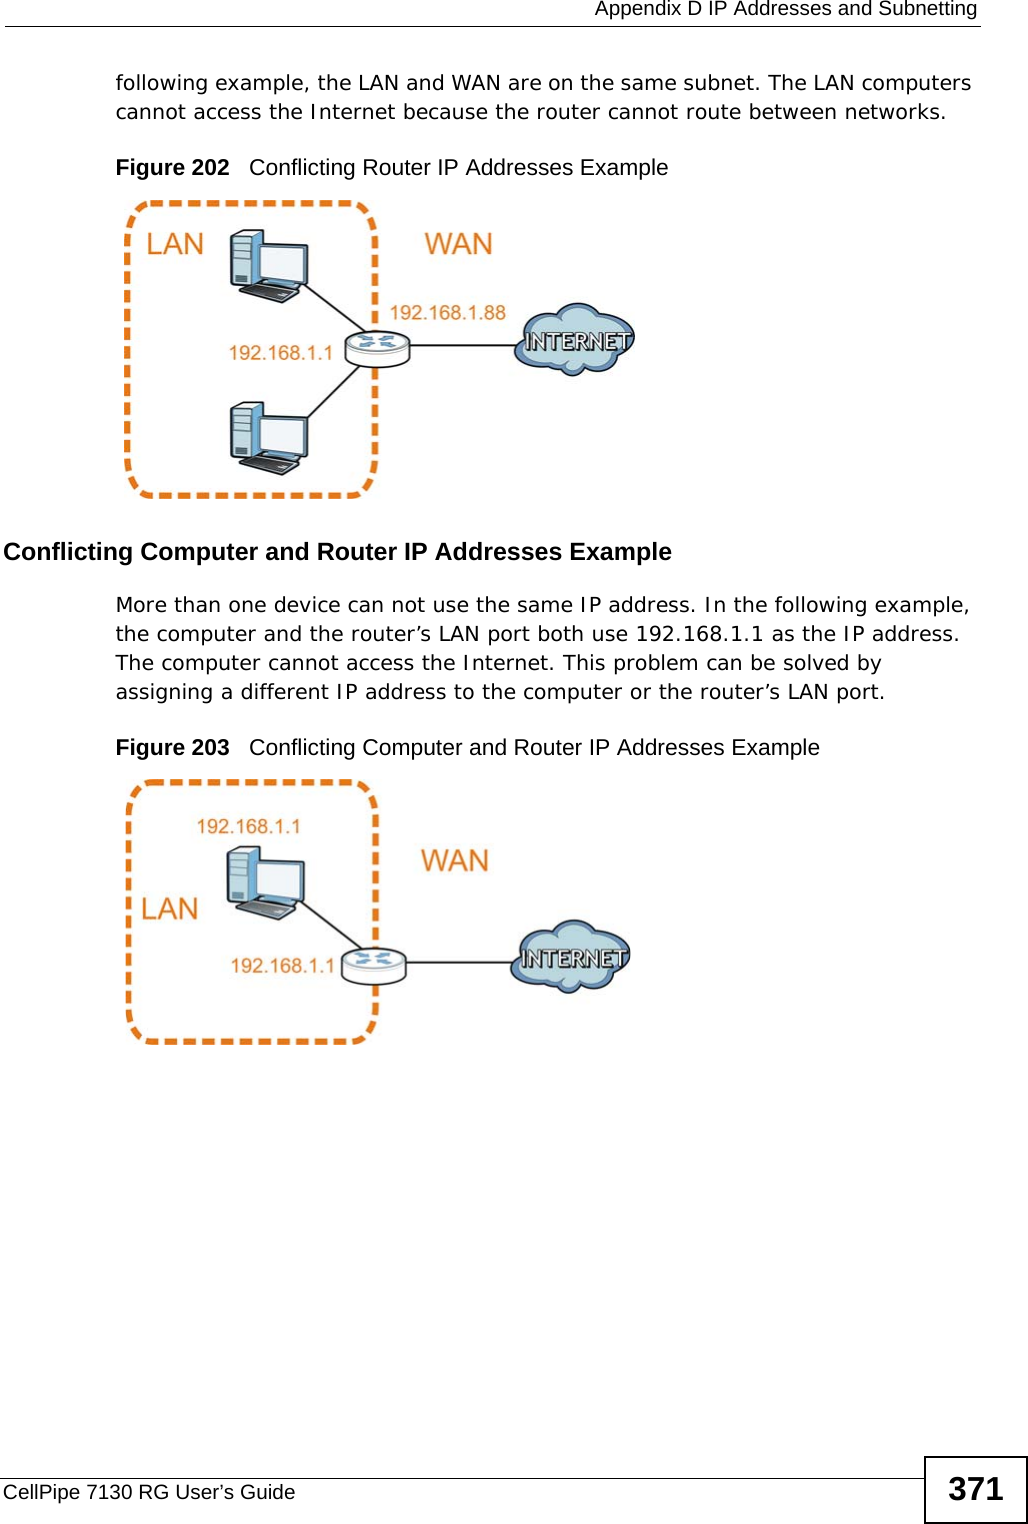  Appendix D IP Addresses and SubnettingCellPipe 7130 RG User’s Guide 371following example, the LAN and WAN are on the same subnet. The LAN computers cannot access the Internet because the router cannot route between networks.Figure 202   Conflicting Router IP Addresses ExampleConflicting Computer and Router IP Addresses ExampleMore than one device can not use the same IP address. In the following example, the computer and the router’s LAN port both use 192.168.1.1 as the IP address. The computer cannot access the Internet. This problem can be solved by assigning a different IP address to the computer or the router’s LAN port.  Figure 203   Conflicting Computer and Router IP Addresses Example